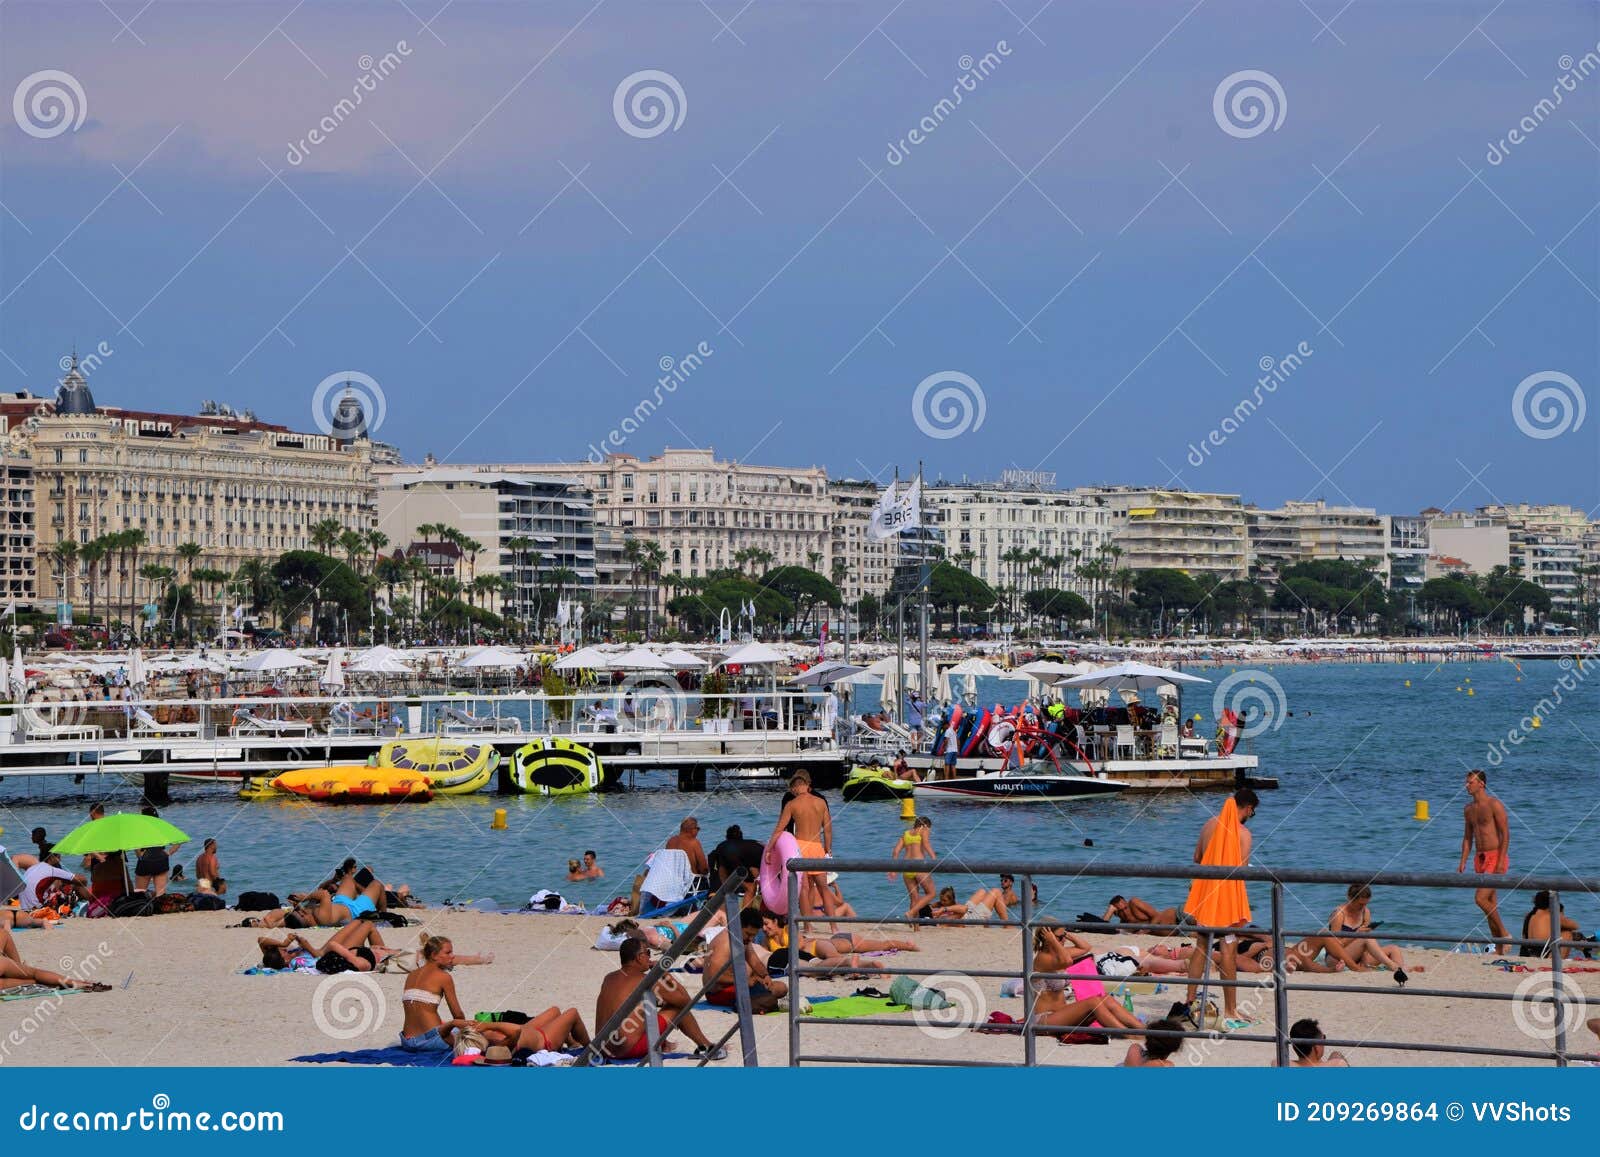 Beach in Cannes, South of France Editorial Stock Image - Image of ...